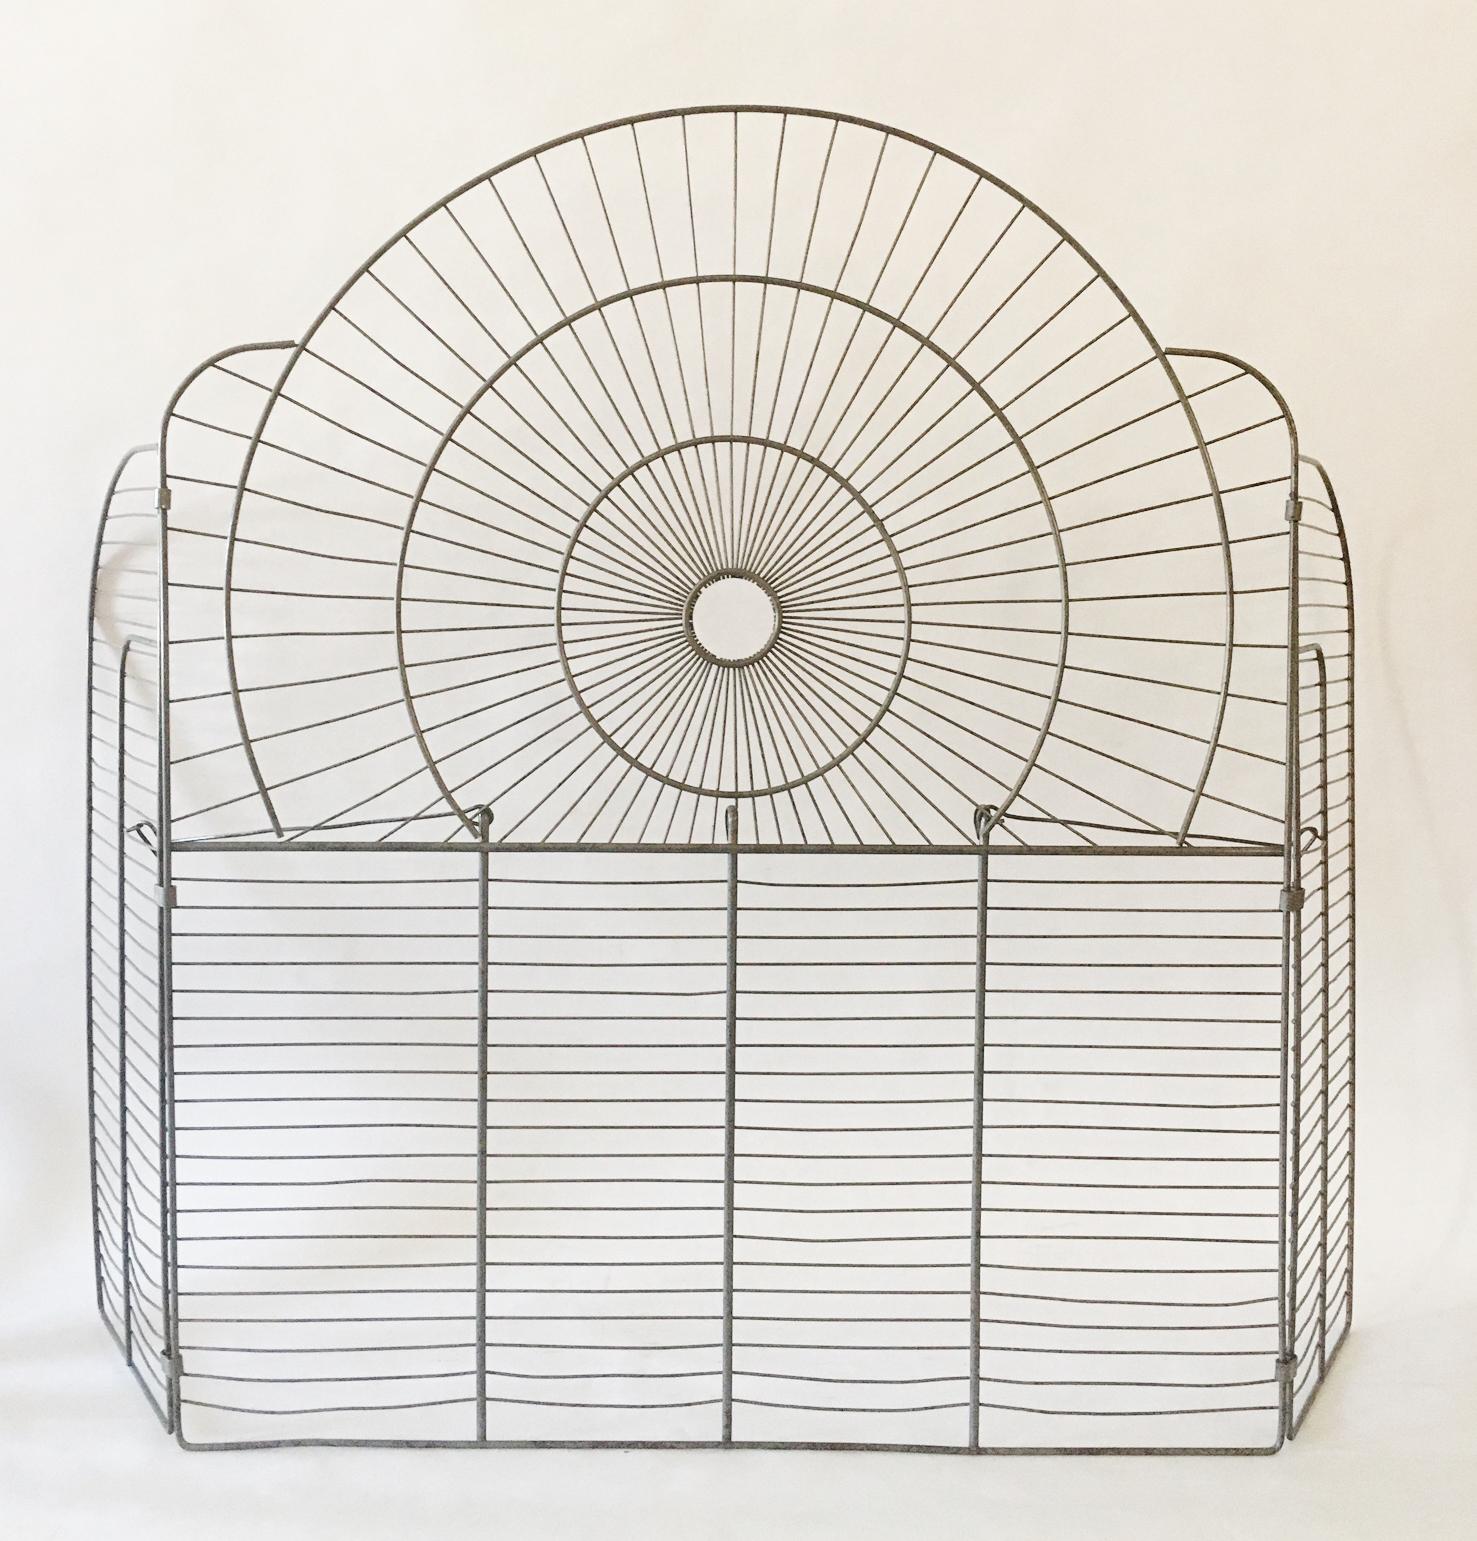 This exquisitely designed French Art Deco fire screen is hand constructed from two different gauges of wire and is one of the finest examples of these unique fireplace accessories that we have ever seen. It has the iconic Odeon shape with two